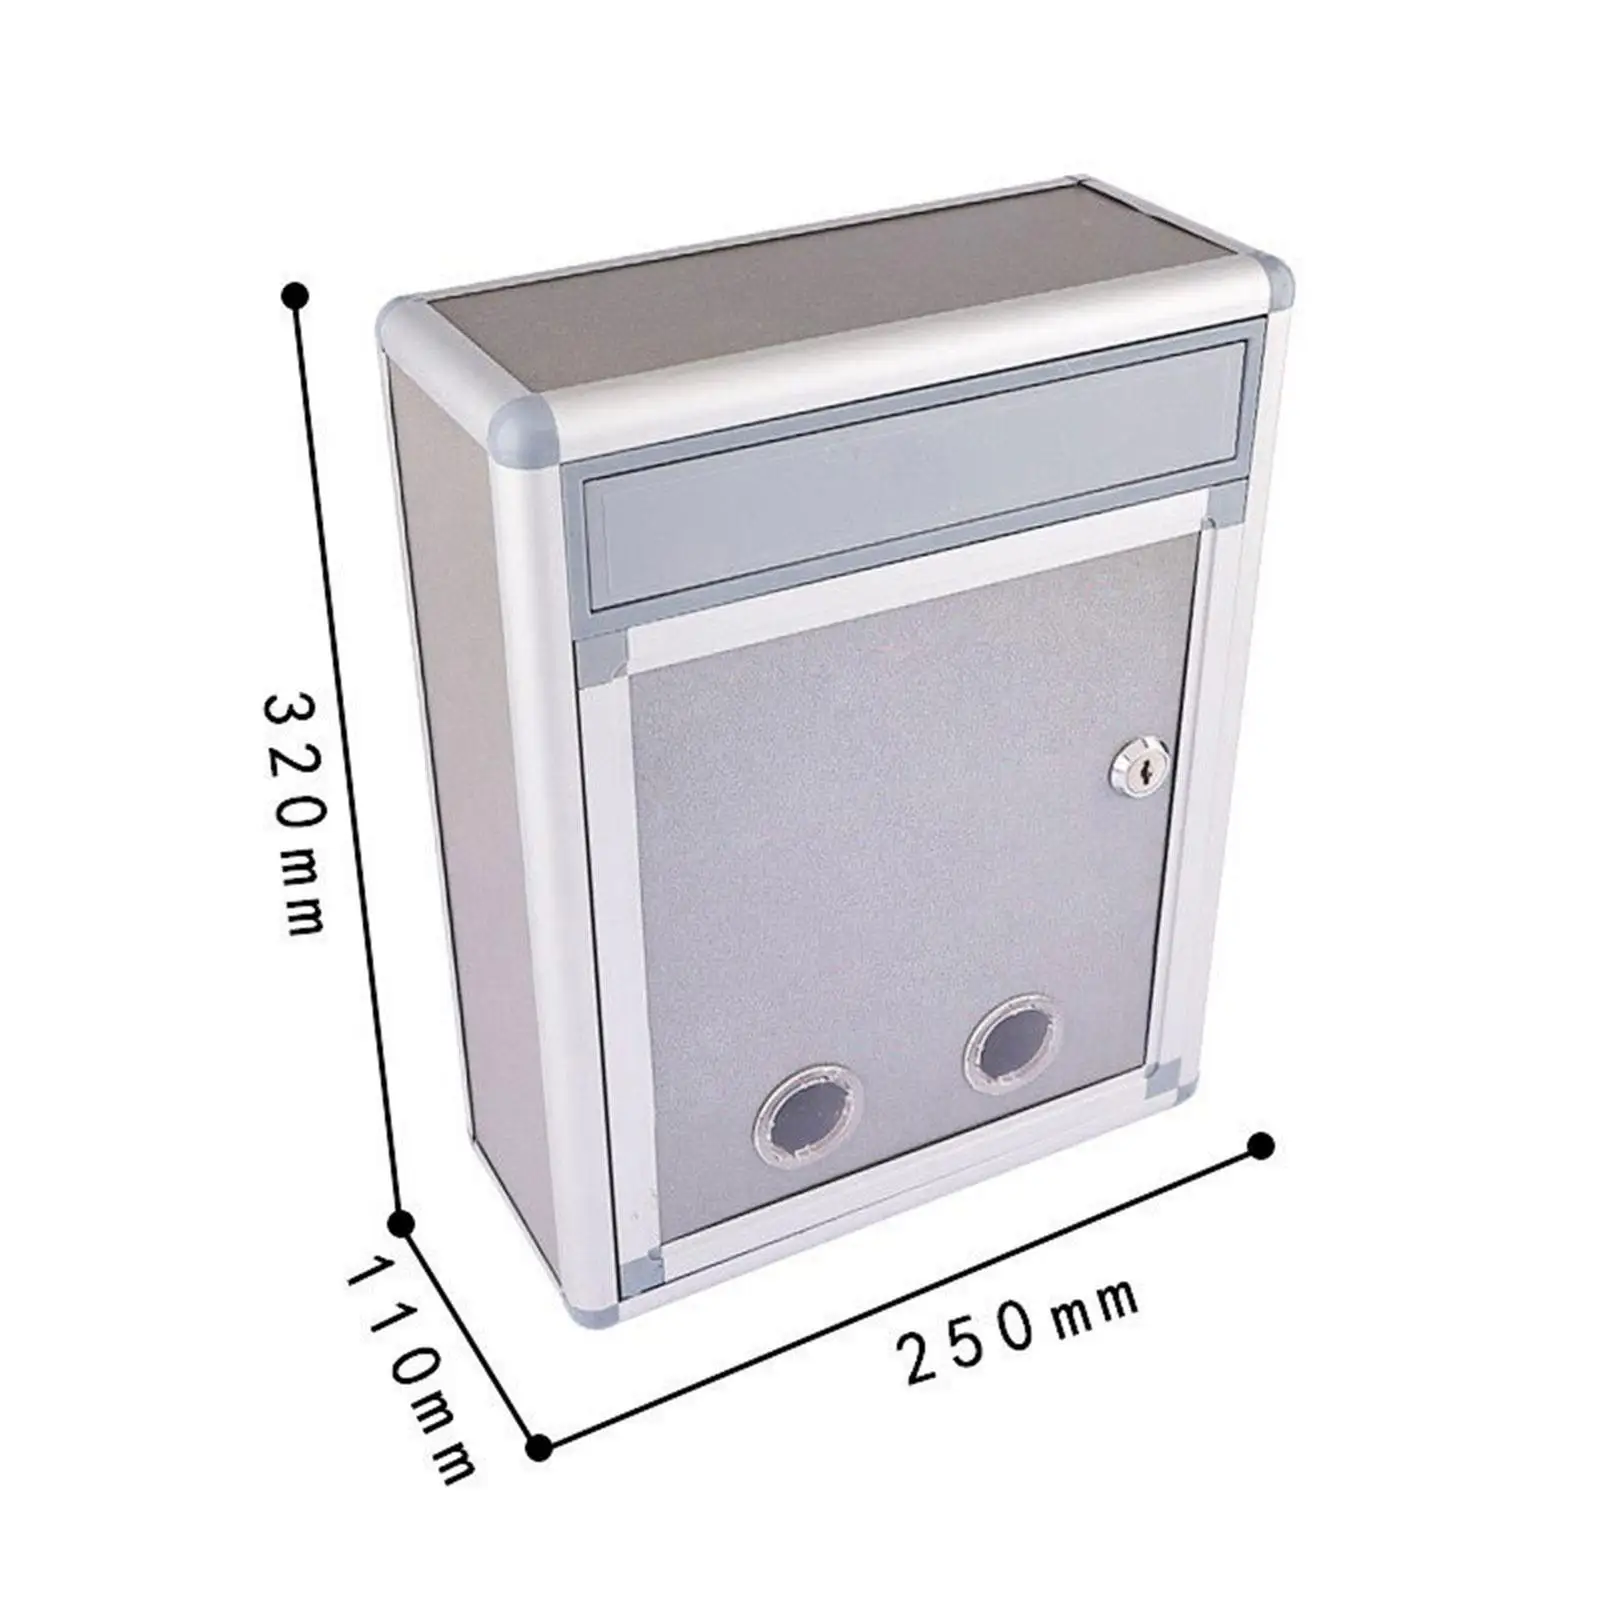 Wall Mounted Mailbox Outside Newspapers with Key Suggestions Collection Box Rustproof Safe Blank Design Weatherproof Drop Box